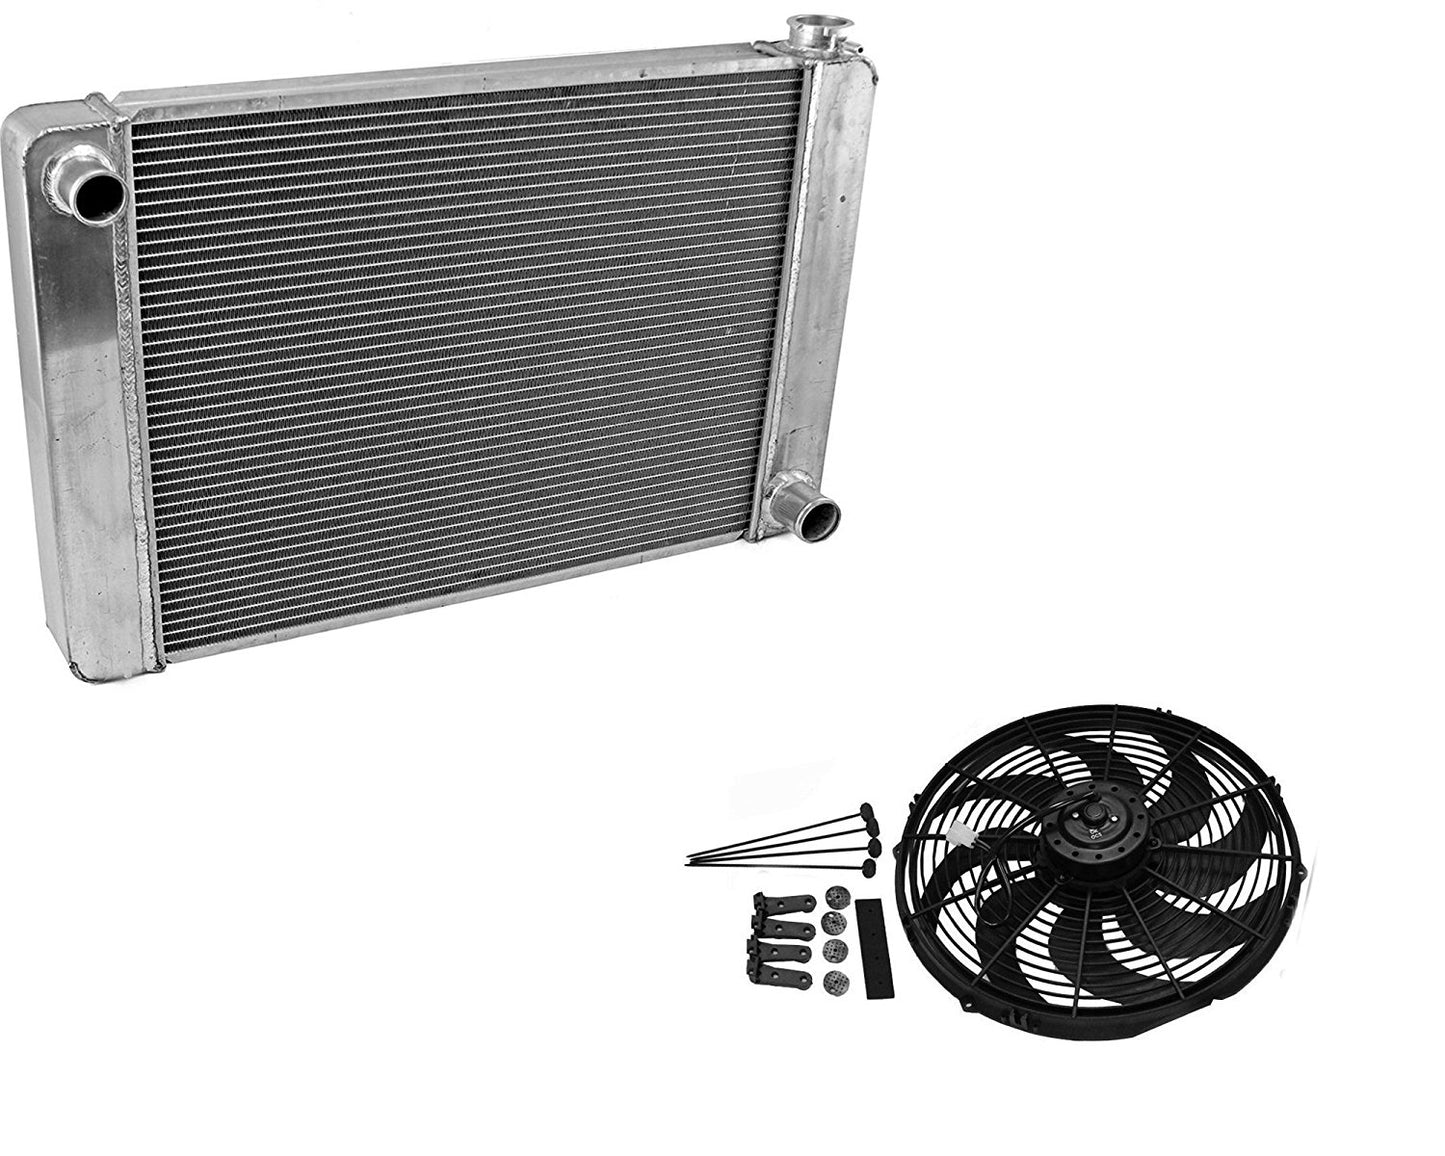 For SBC BBC Chevy GM Fabricated Aluminum Radiator 22" x 19" x3" & 14" Electric Wide Curved Blade Fan